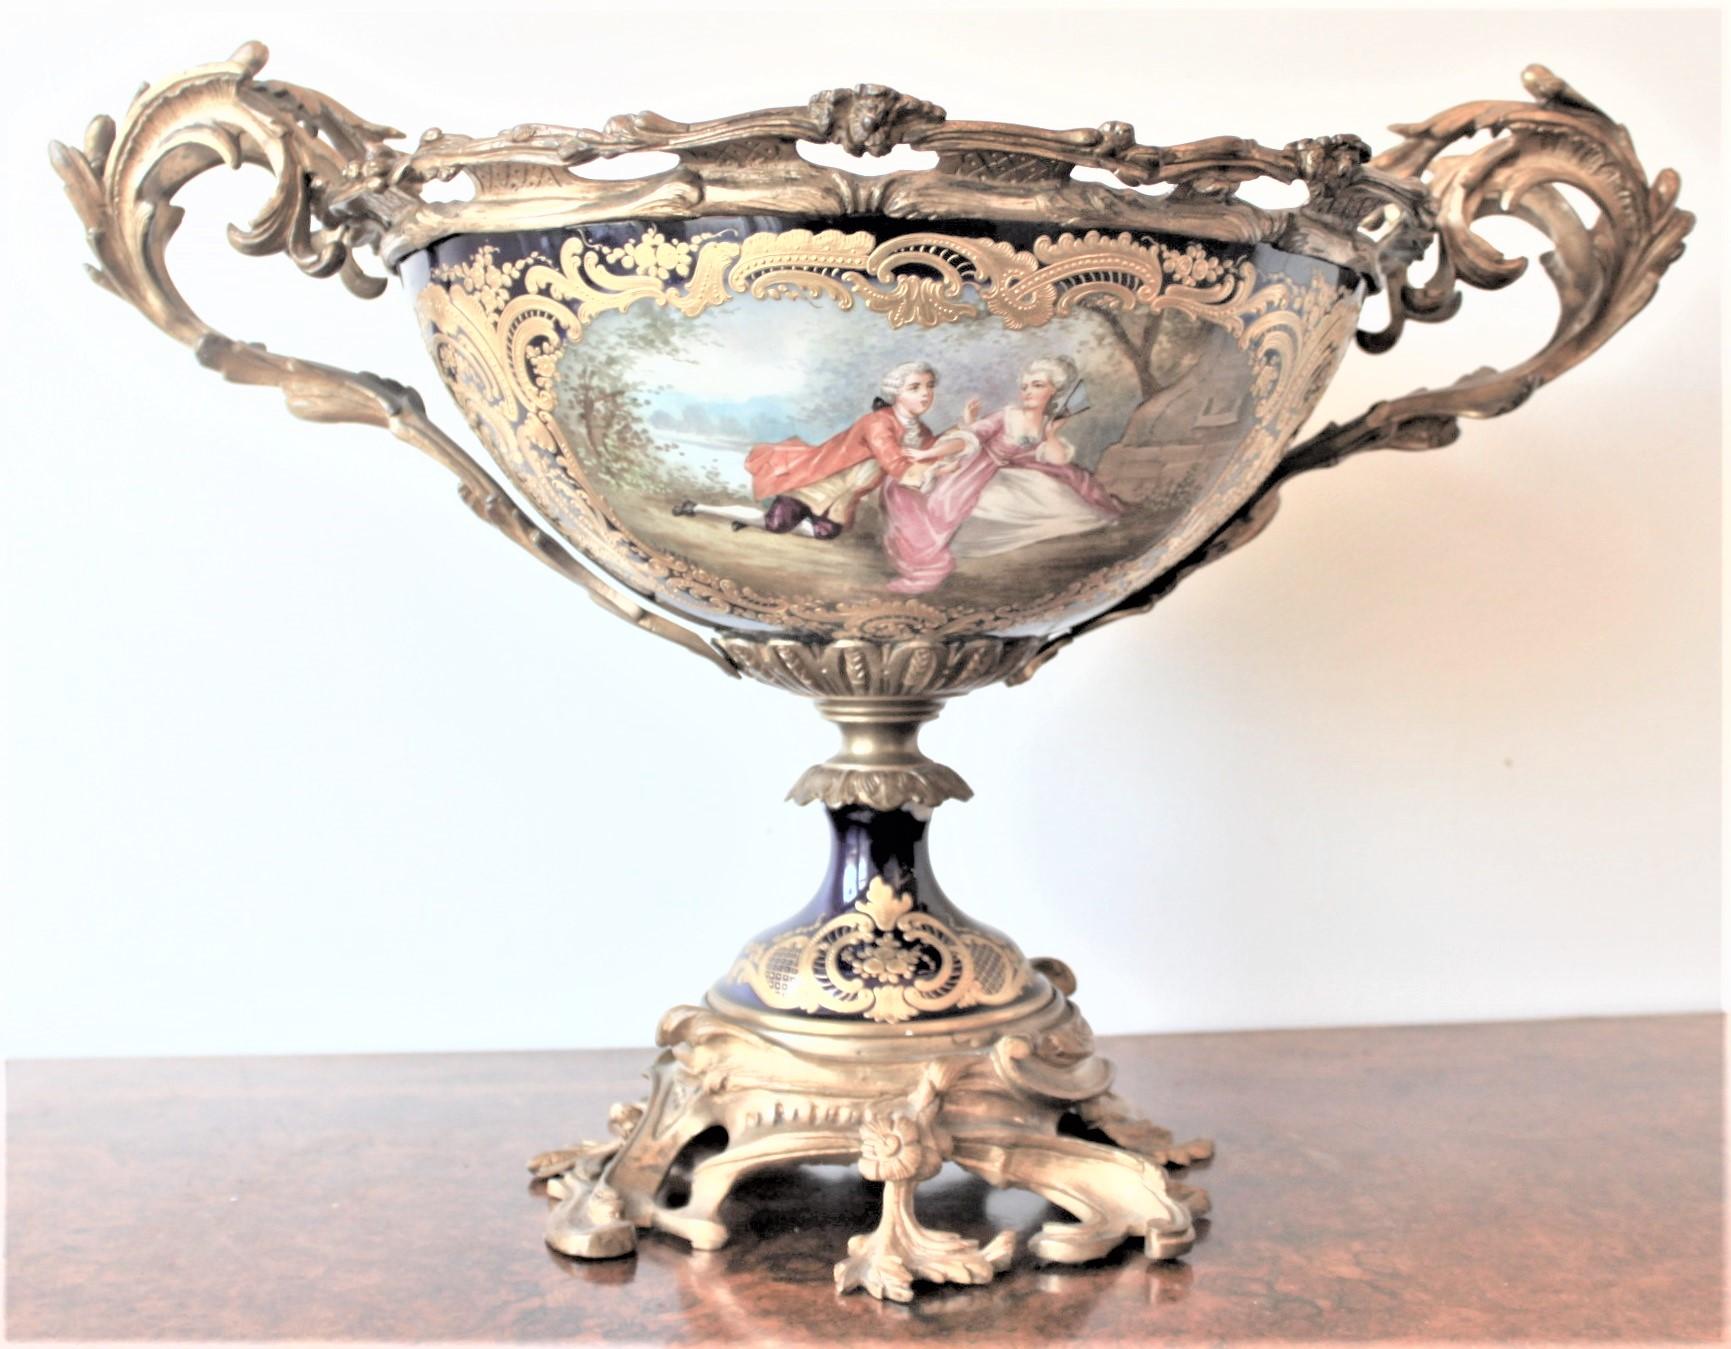 Antique Sevres Ormolu-Mounted and Hand Painted Porcelain Centerpiece or Compote 13